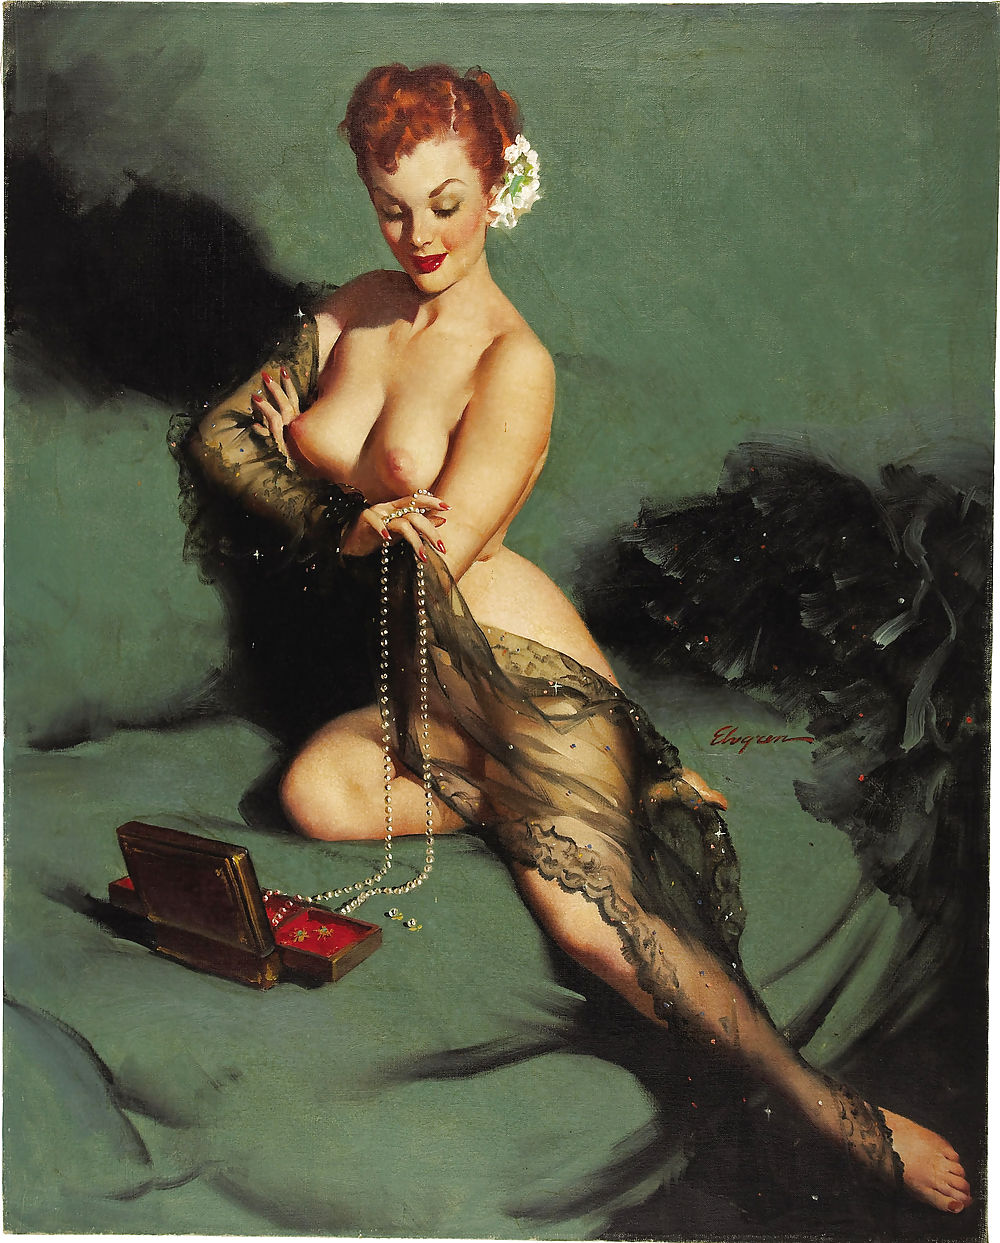 Sexy Vintage Pin - Up Art #6041859